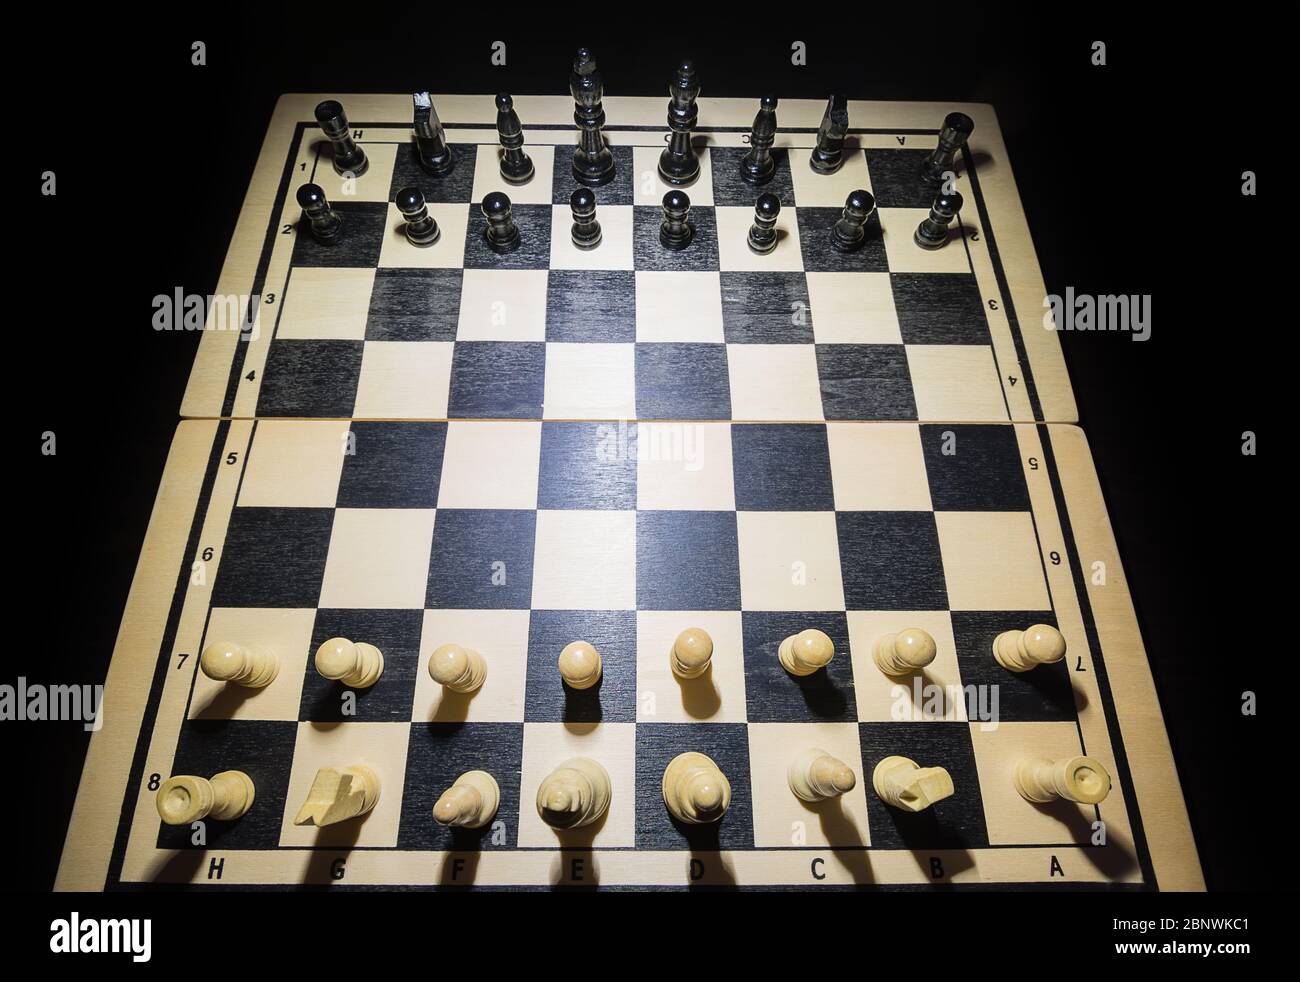 Chessboard with the pieces in the starting position seen from above Stock Photo